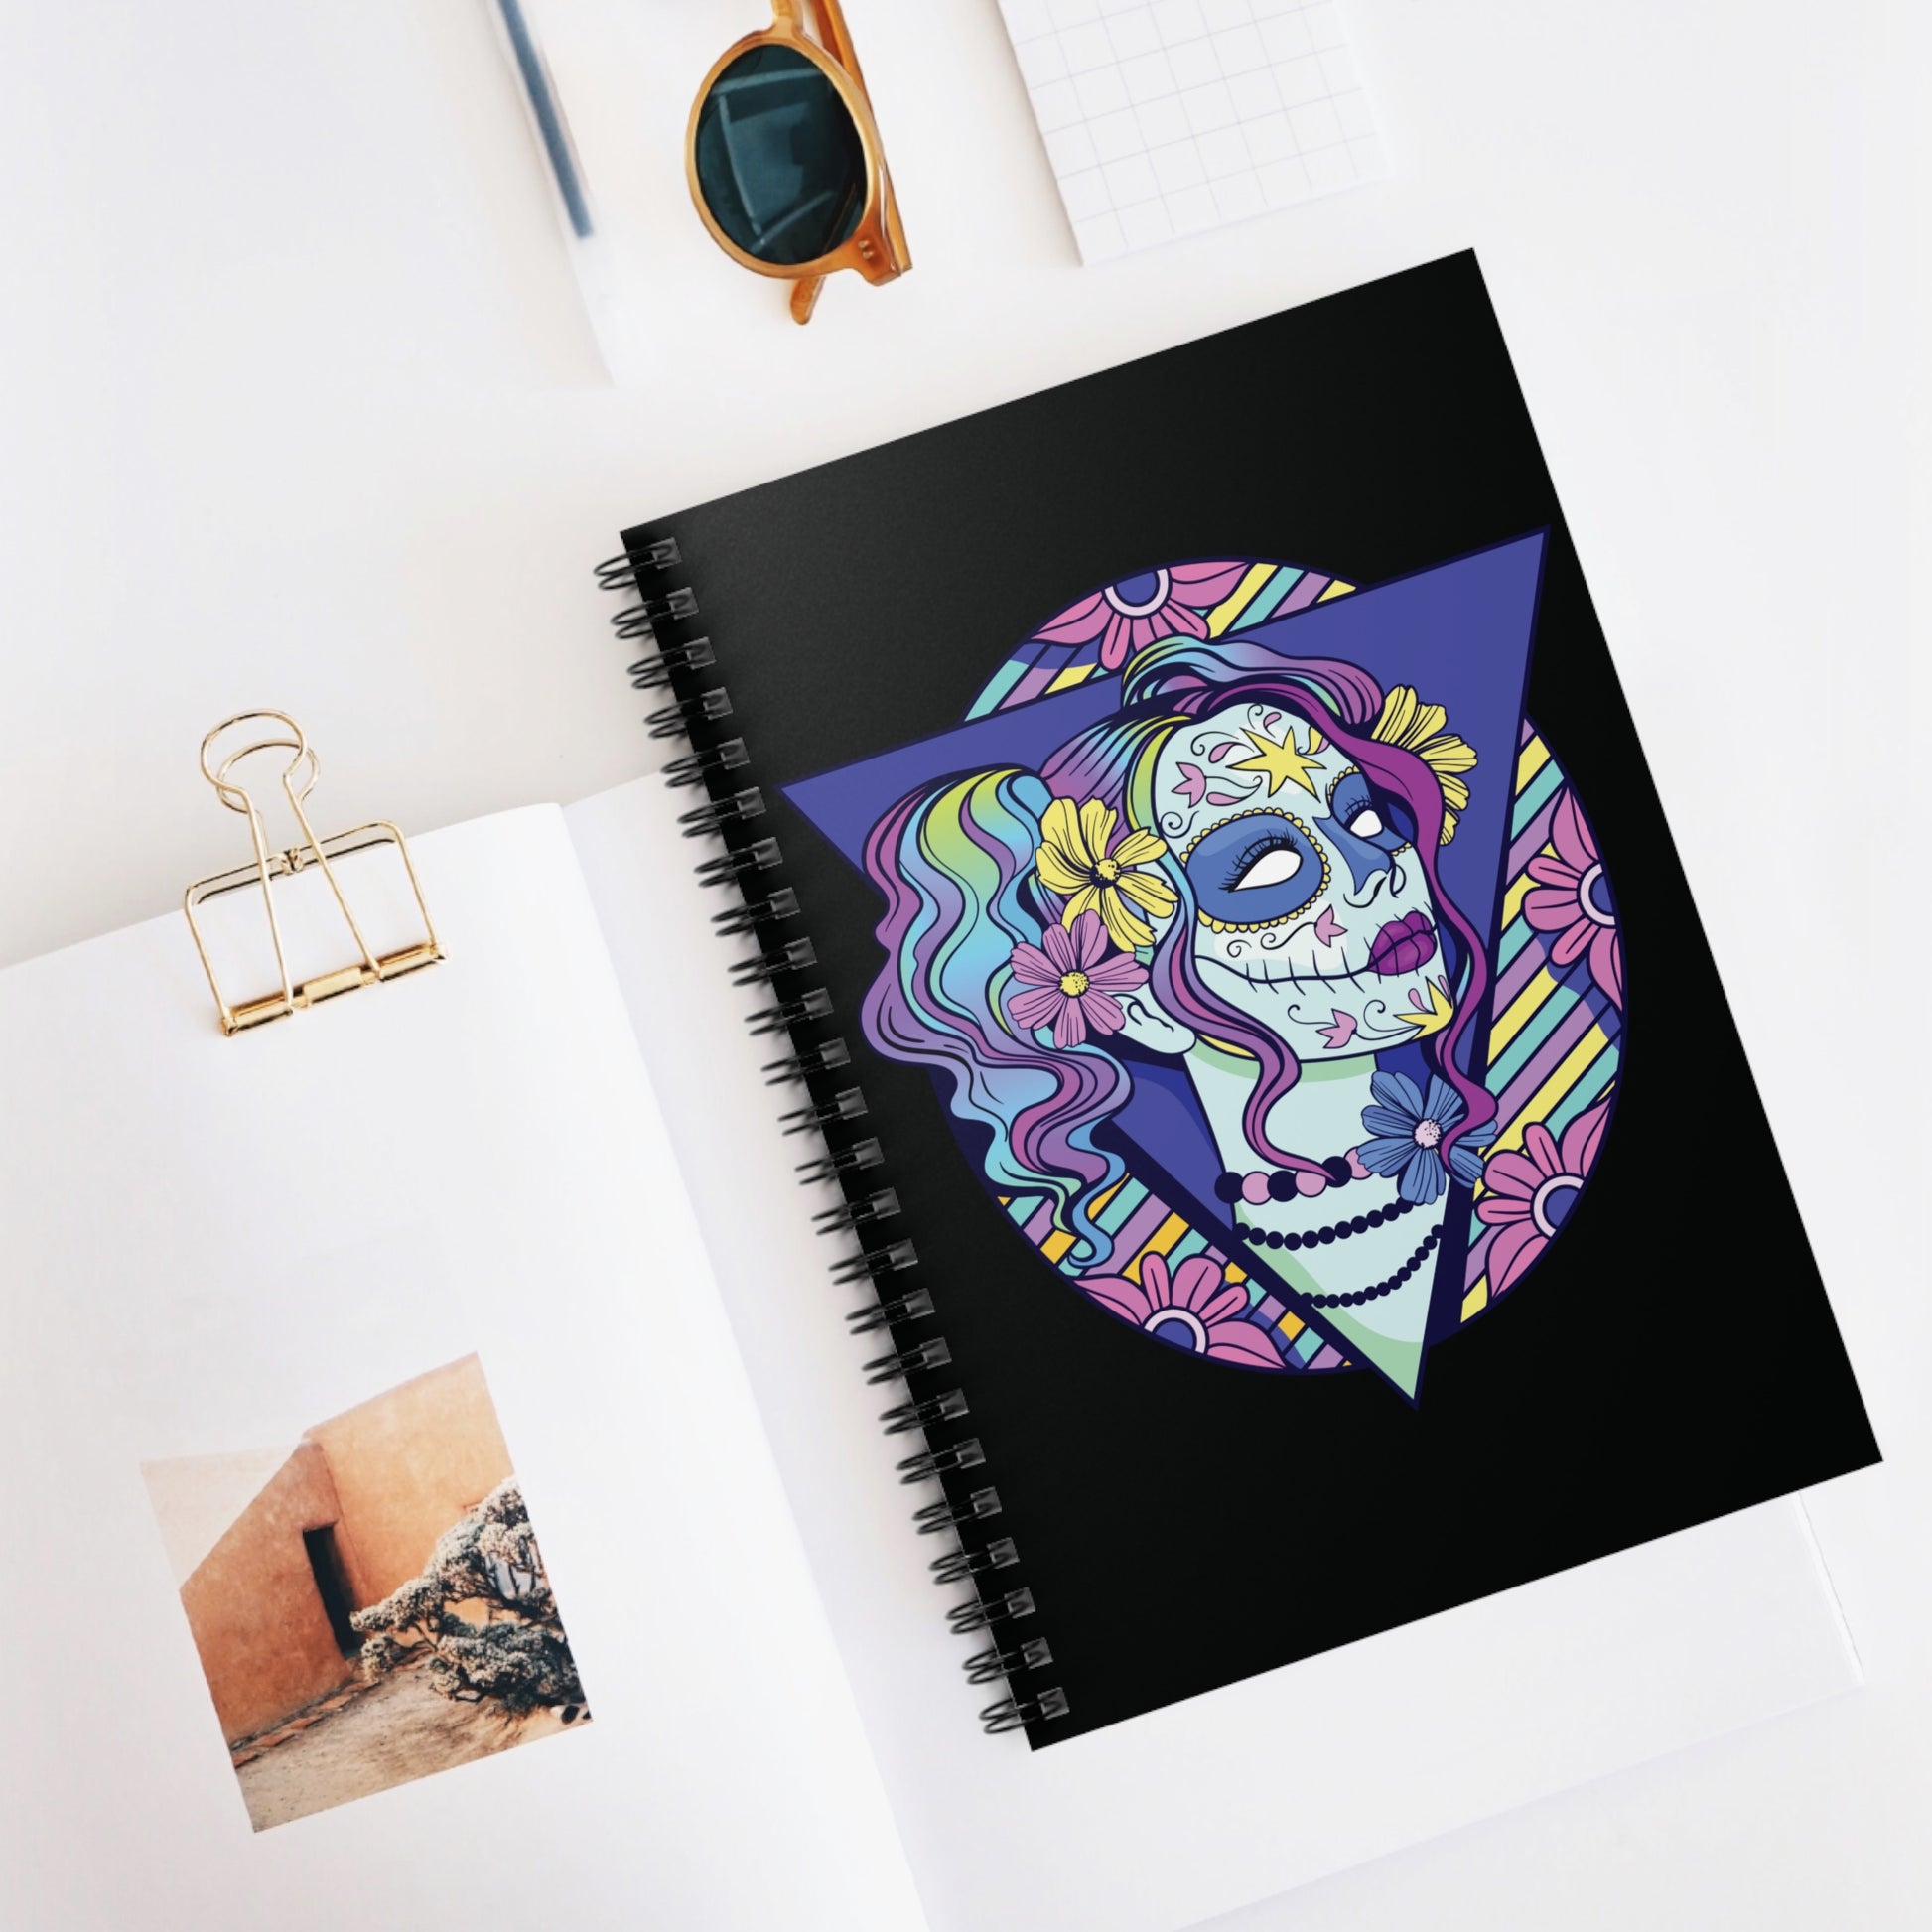 Black Candy Skull: Spiral Notebook - Log Books - Journals - Diaries - and More Custom Printed by TheGlassyLass